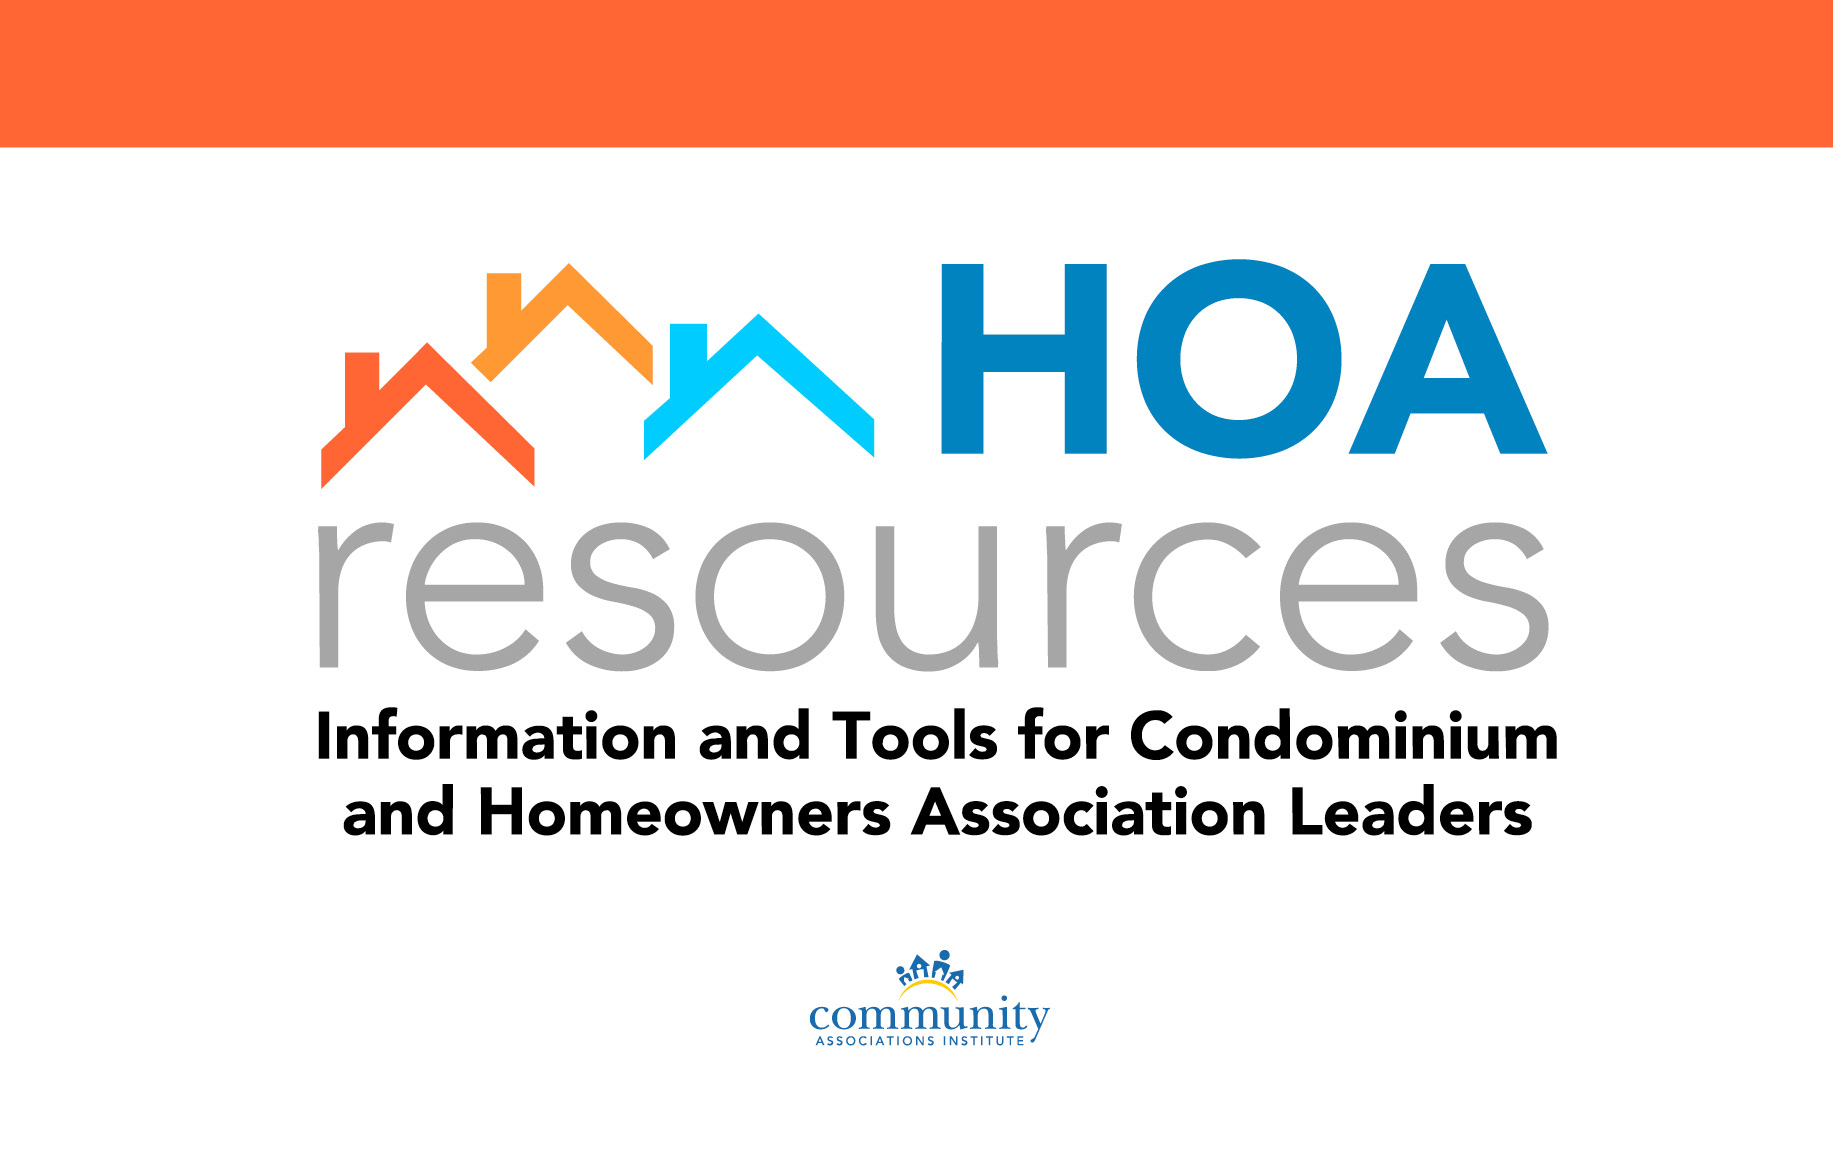 Information & Tools for Community Association Leaders